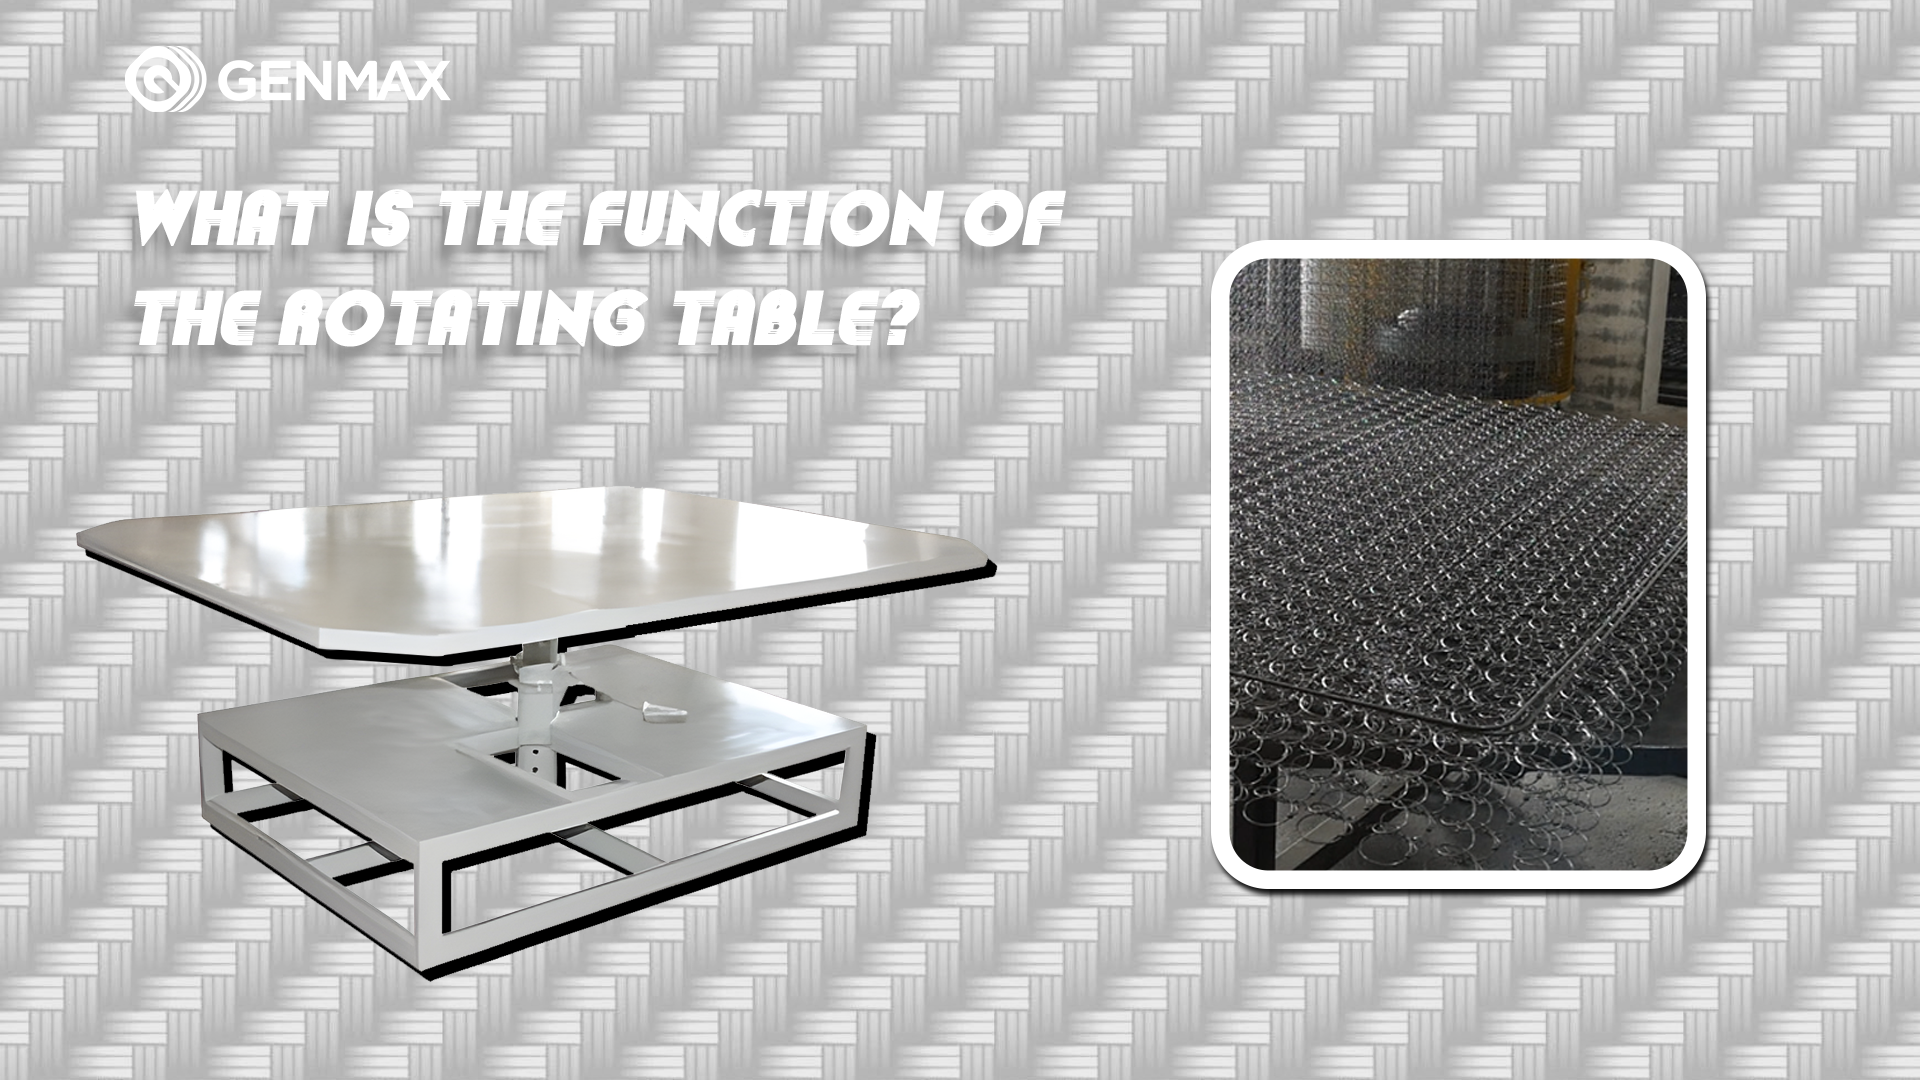 What Is The Function of The Rotating Table?